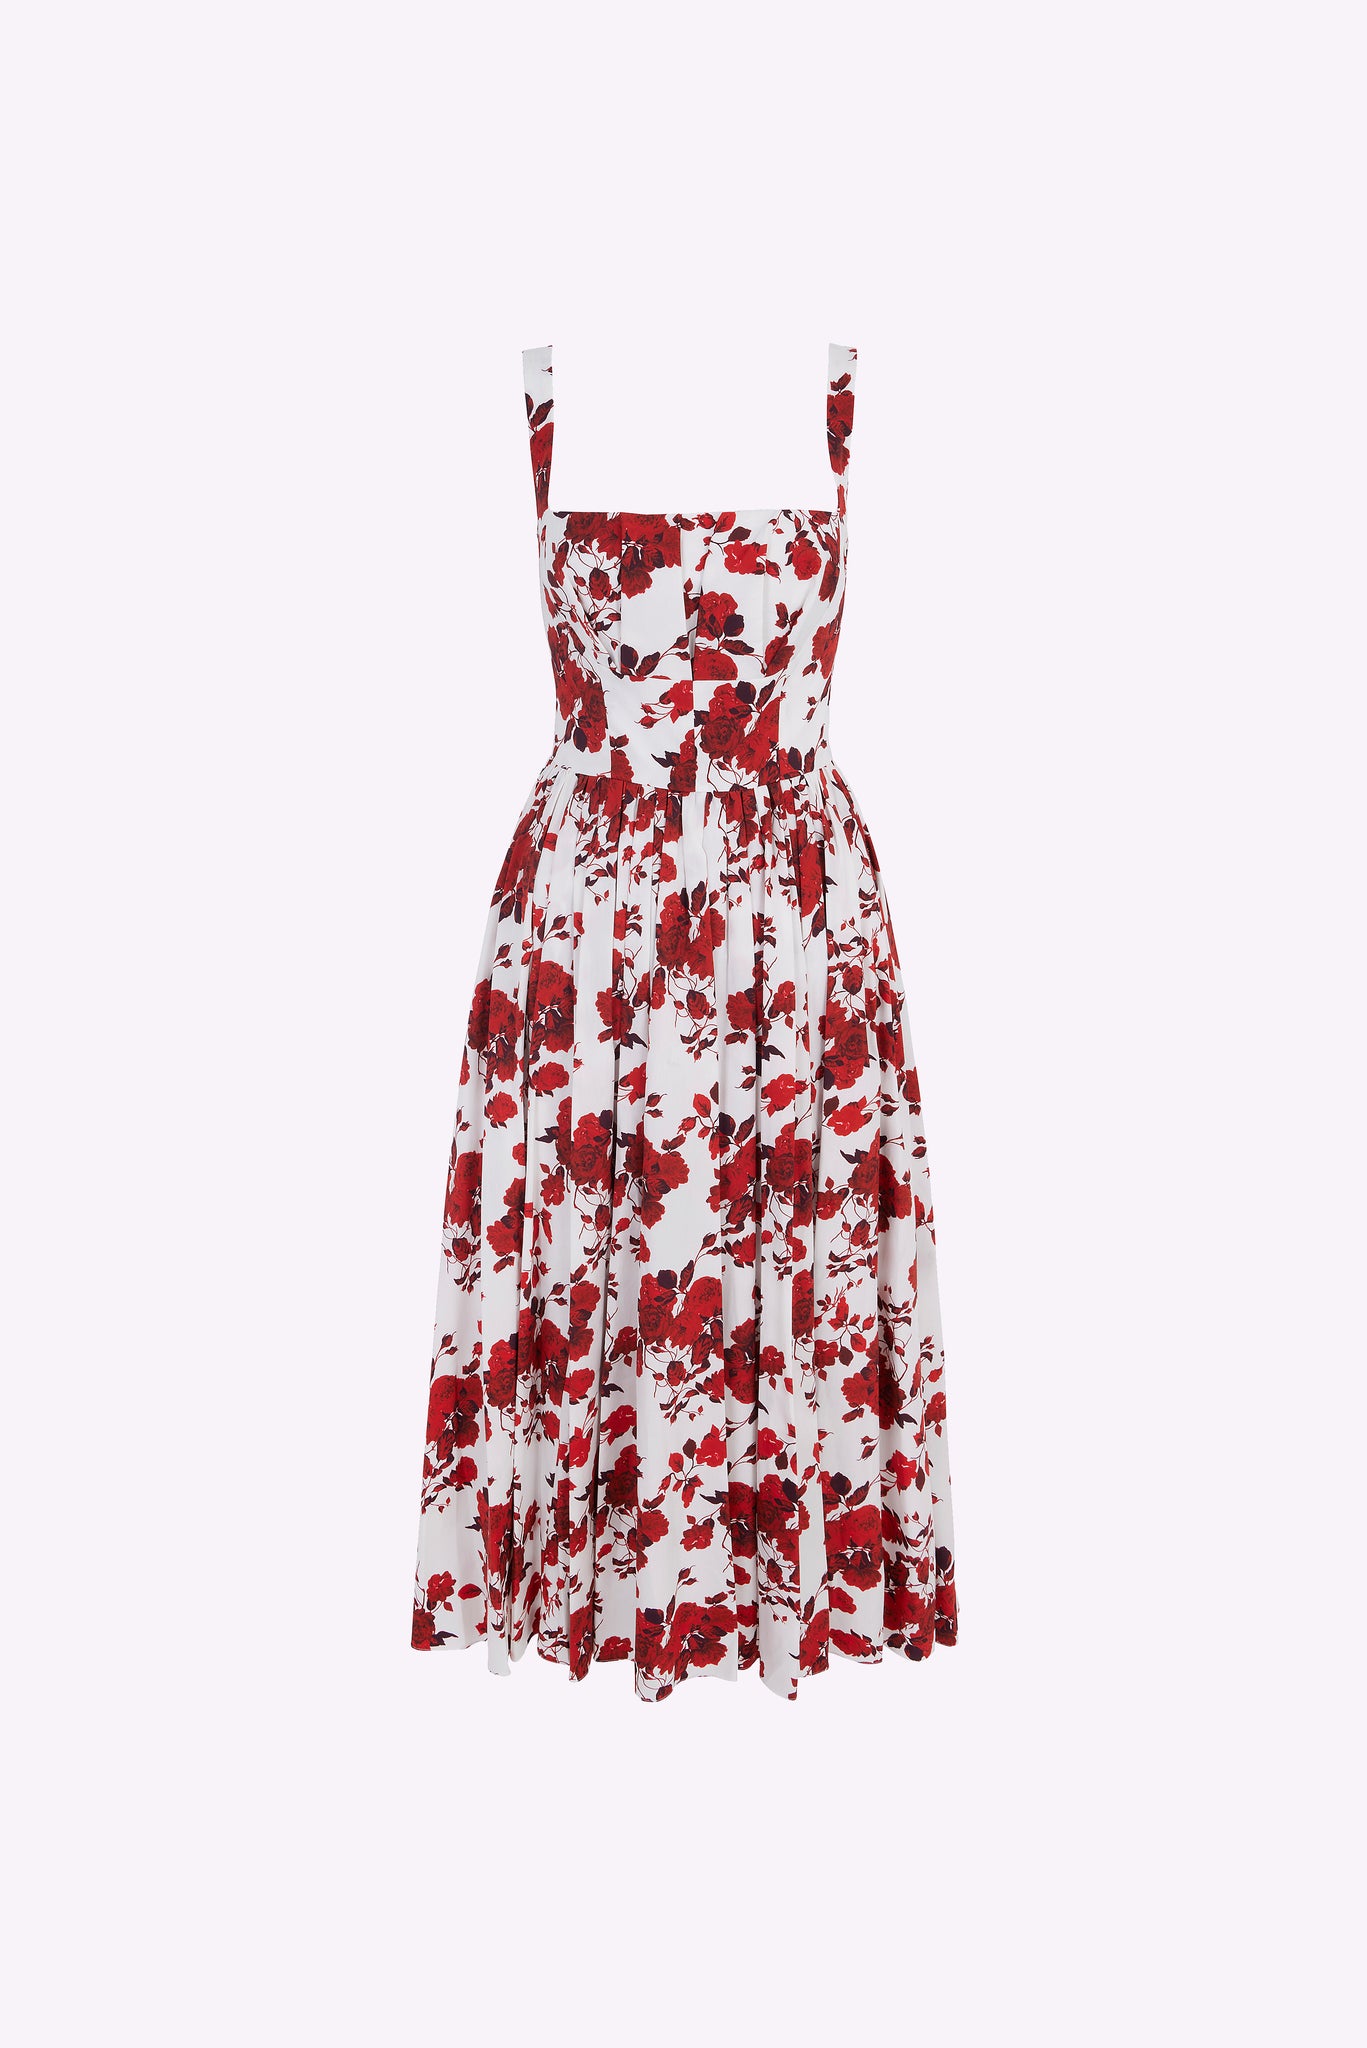 Terry Dress in Red Floral Printed Cotton